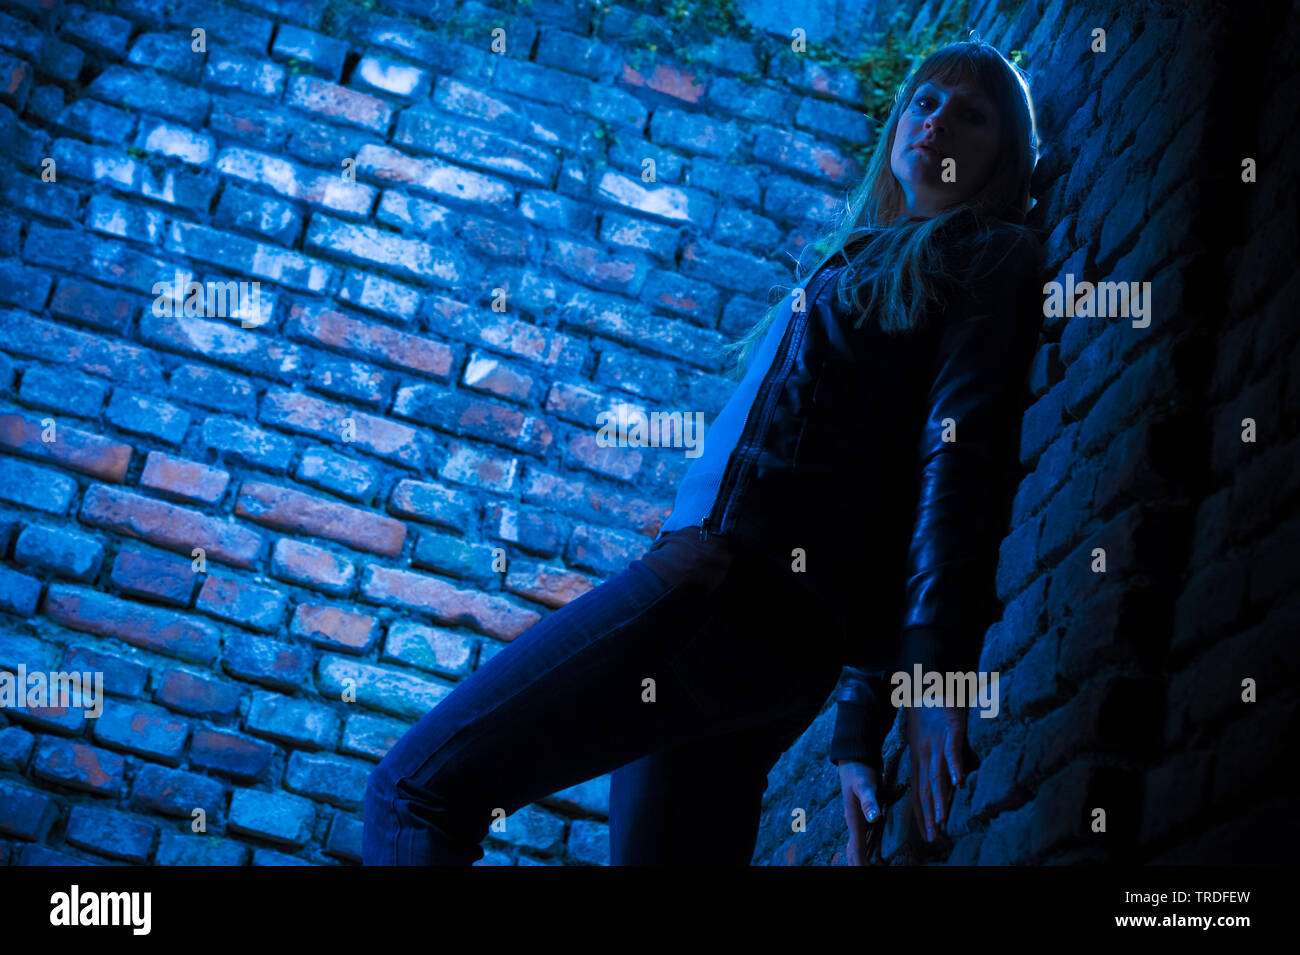 Night shot of a woman dressed in jeans and blue t-shirt in front of red brick walls Stock Photo